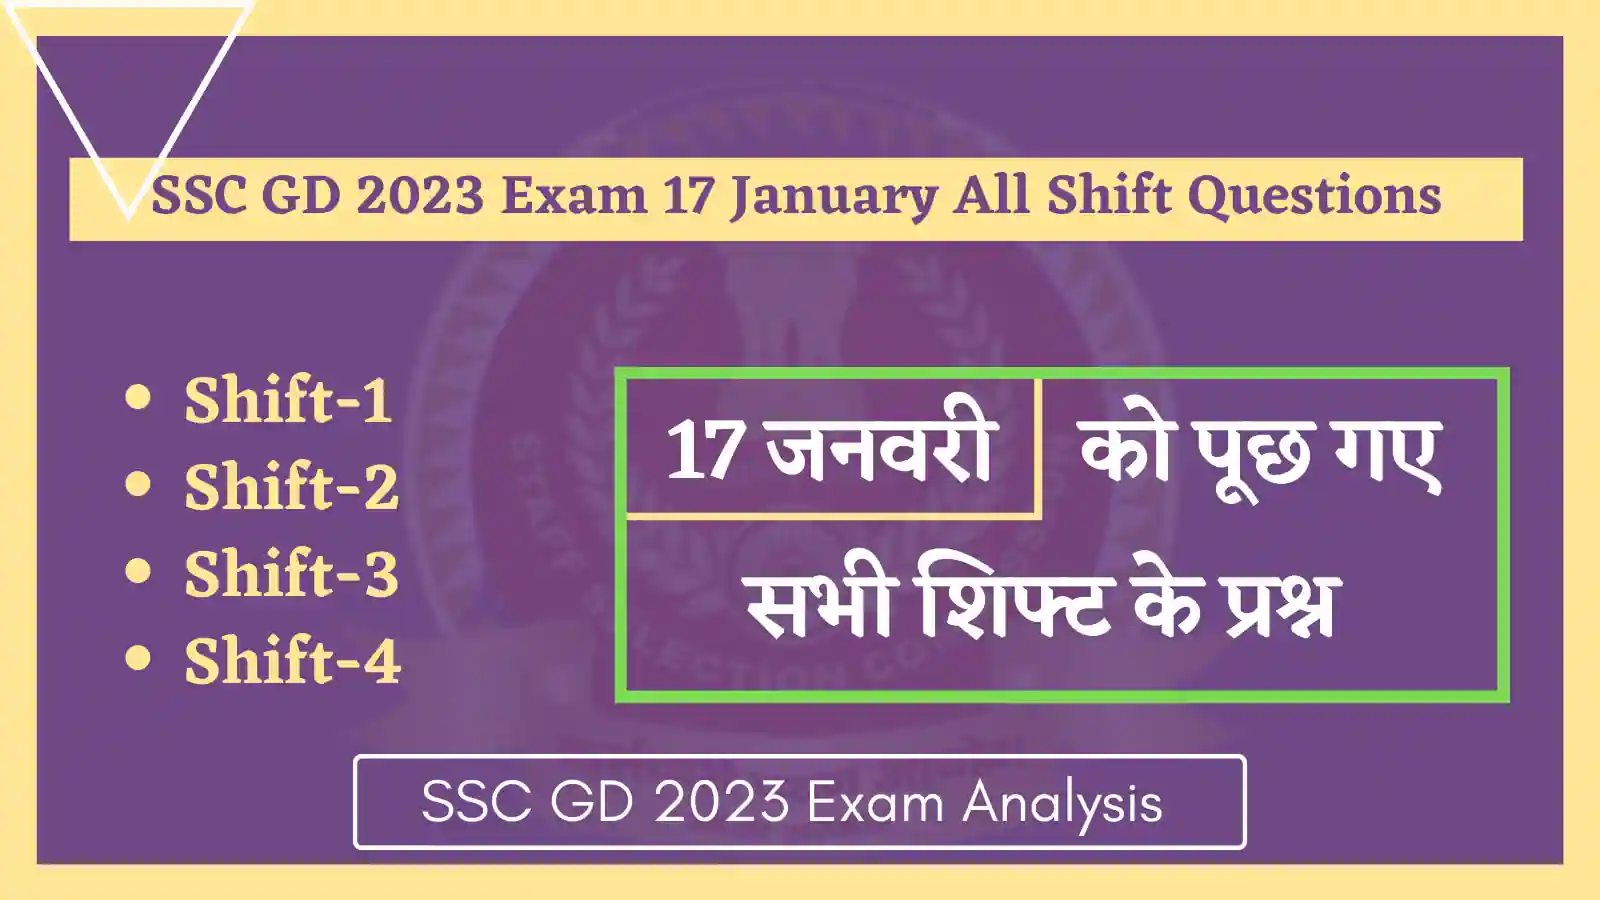 SSC GD 2023 Exam 17 January All Shift Questions